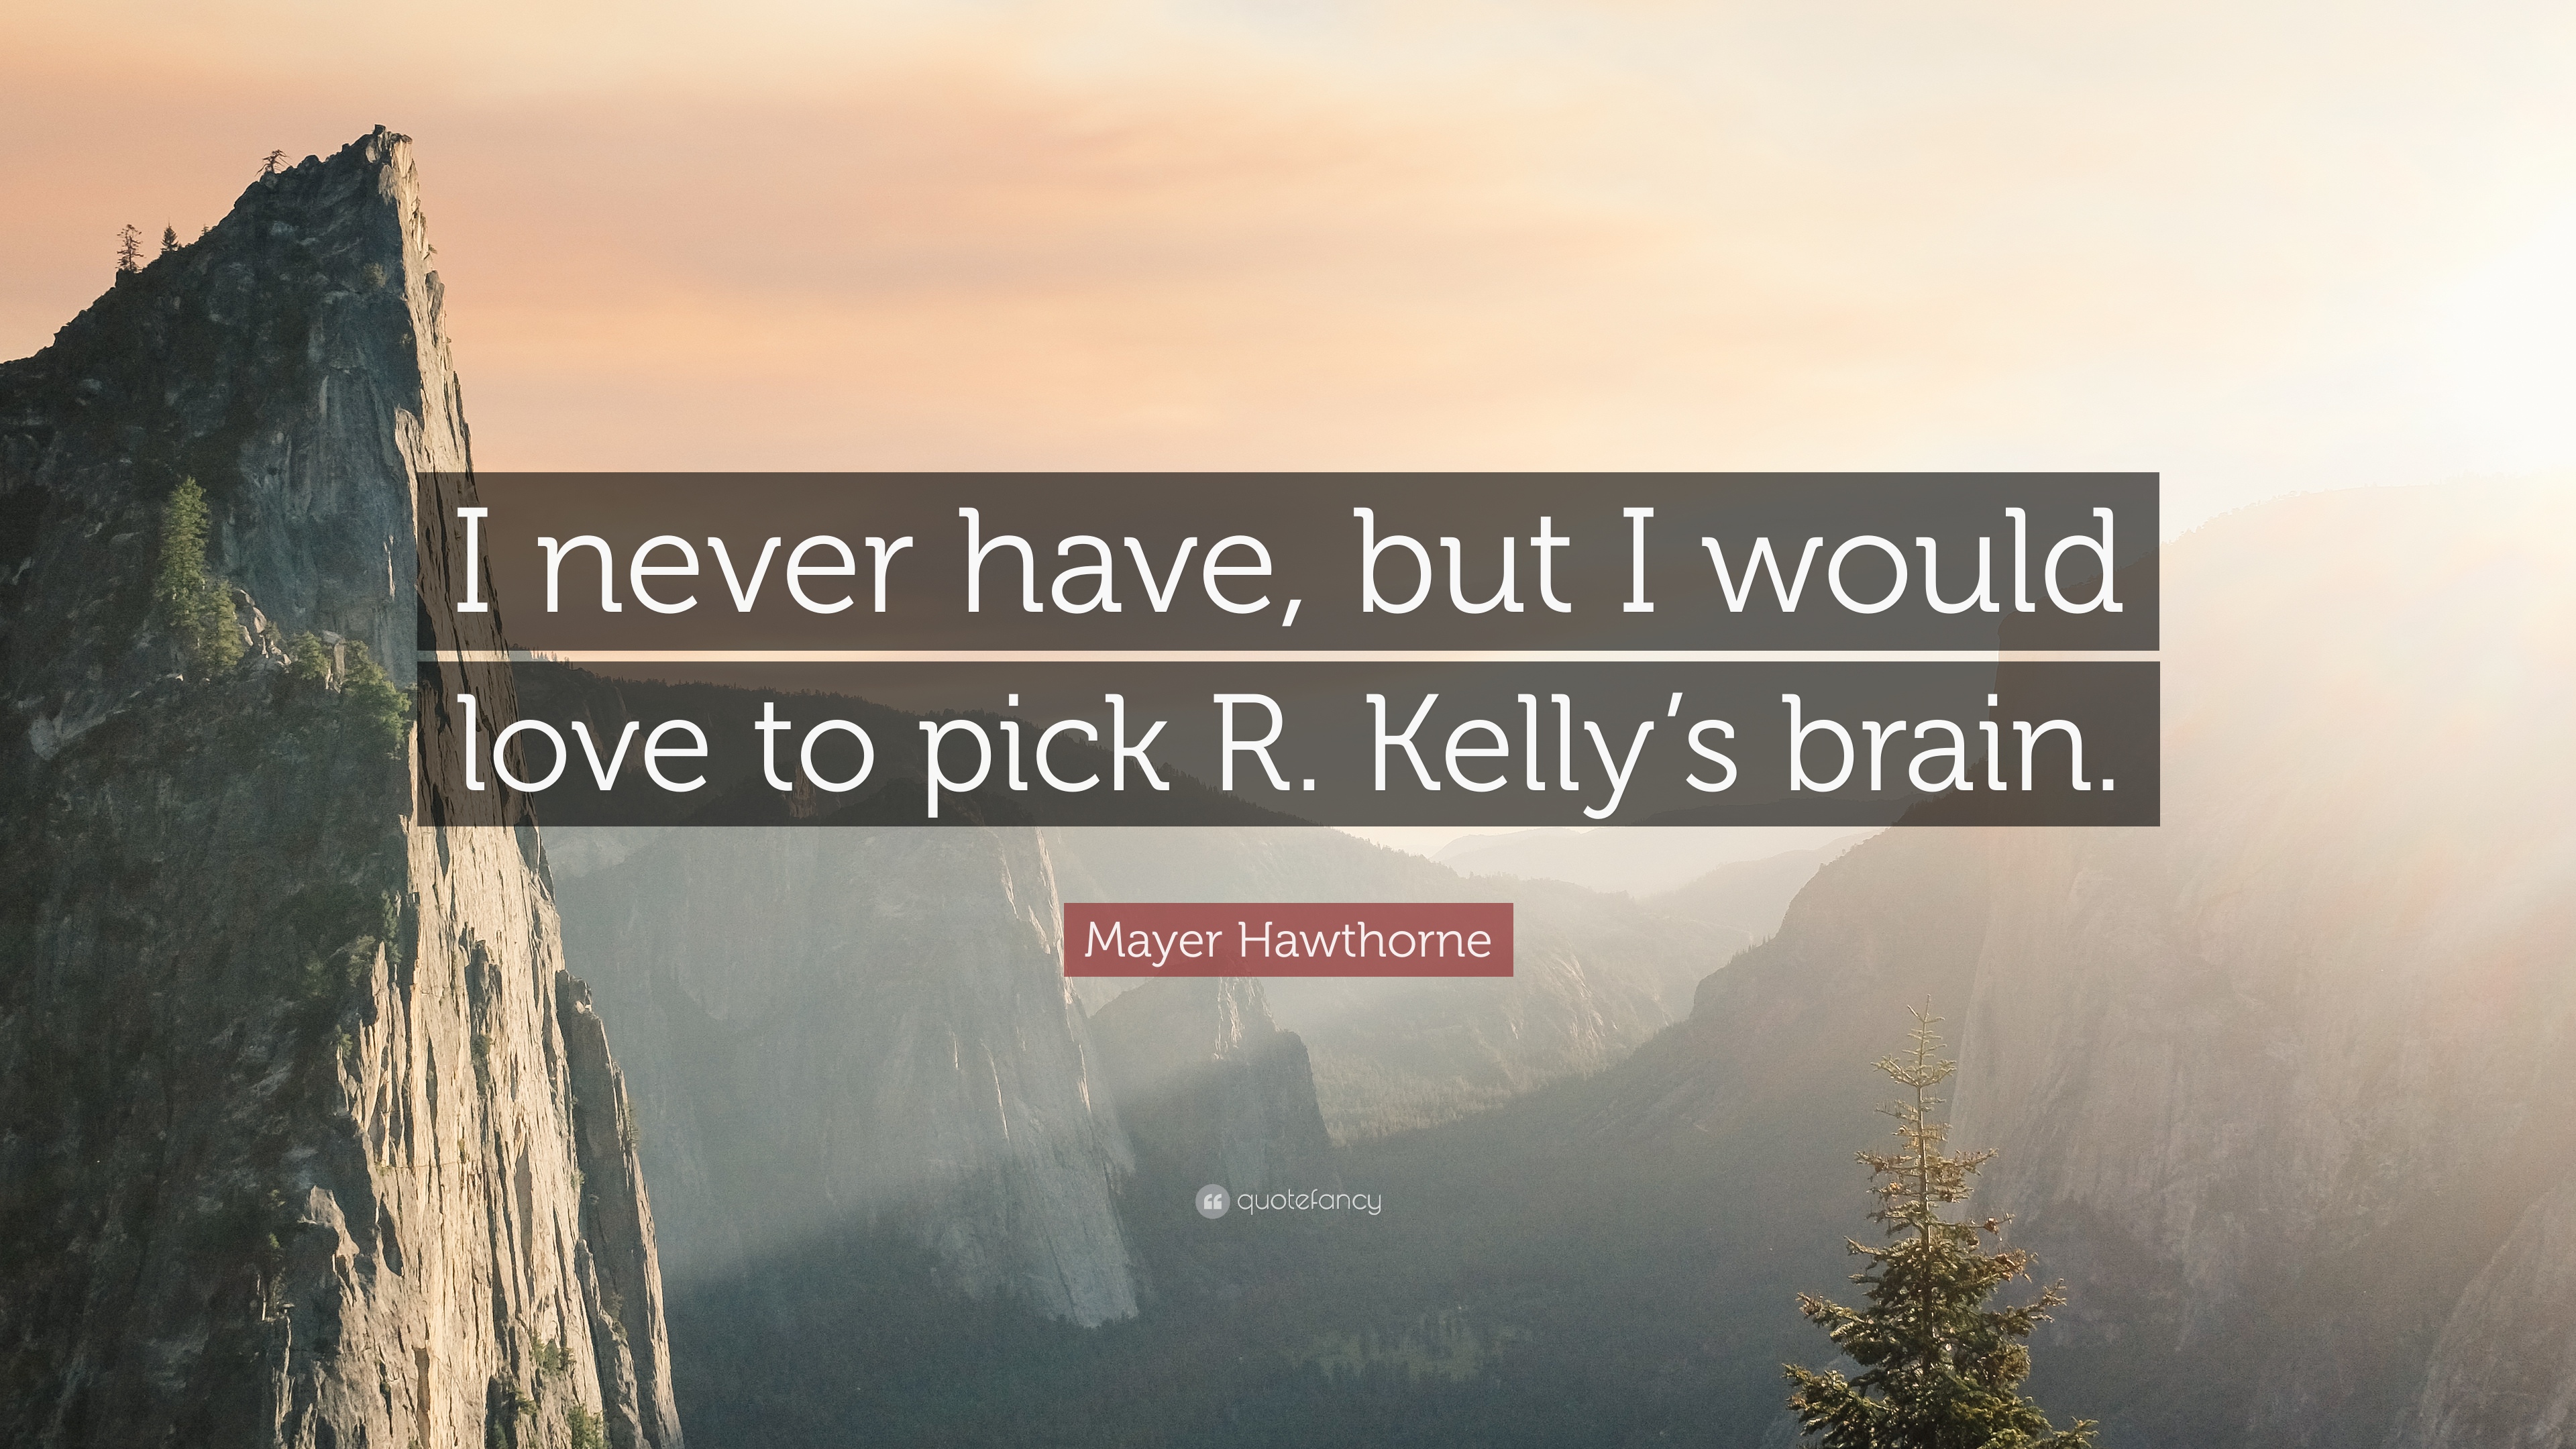 Mayer Hawthorne Quote: “I never have, but I would love to pick R ...